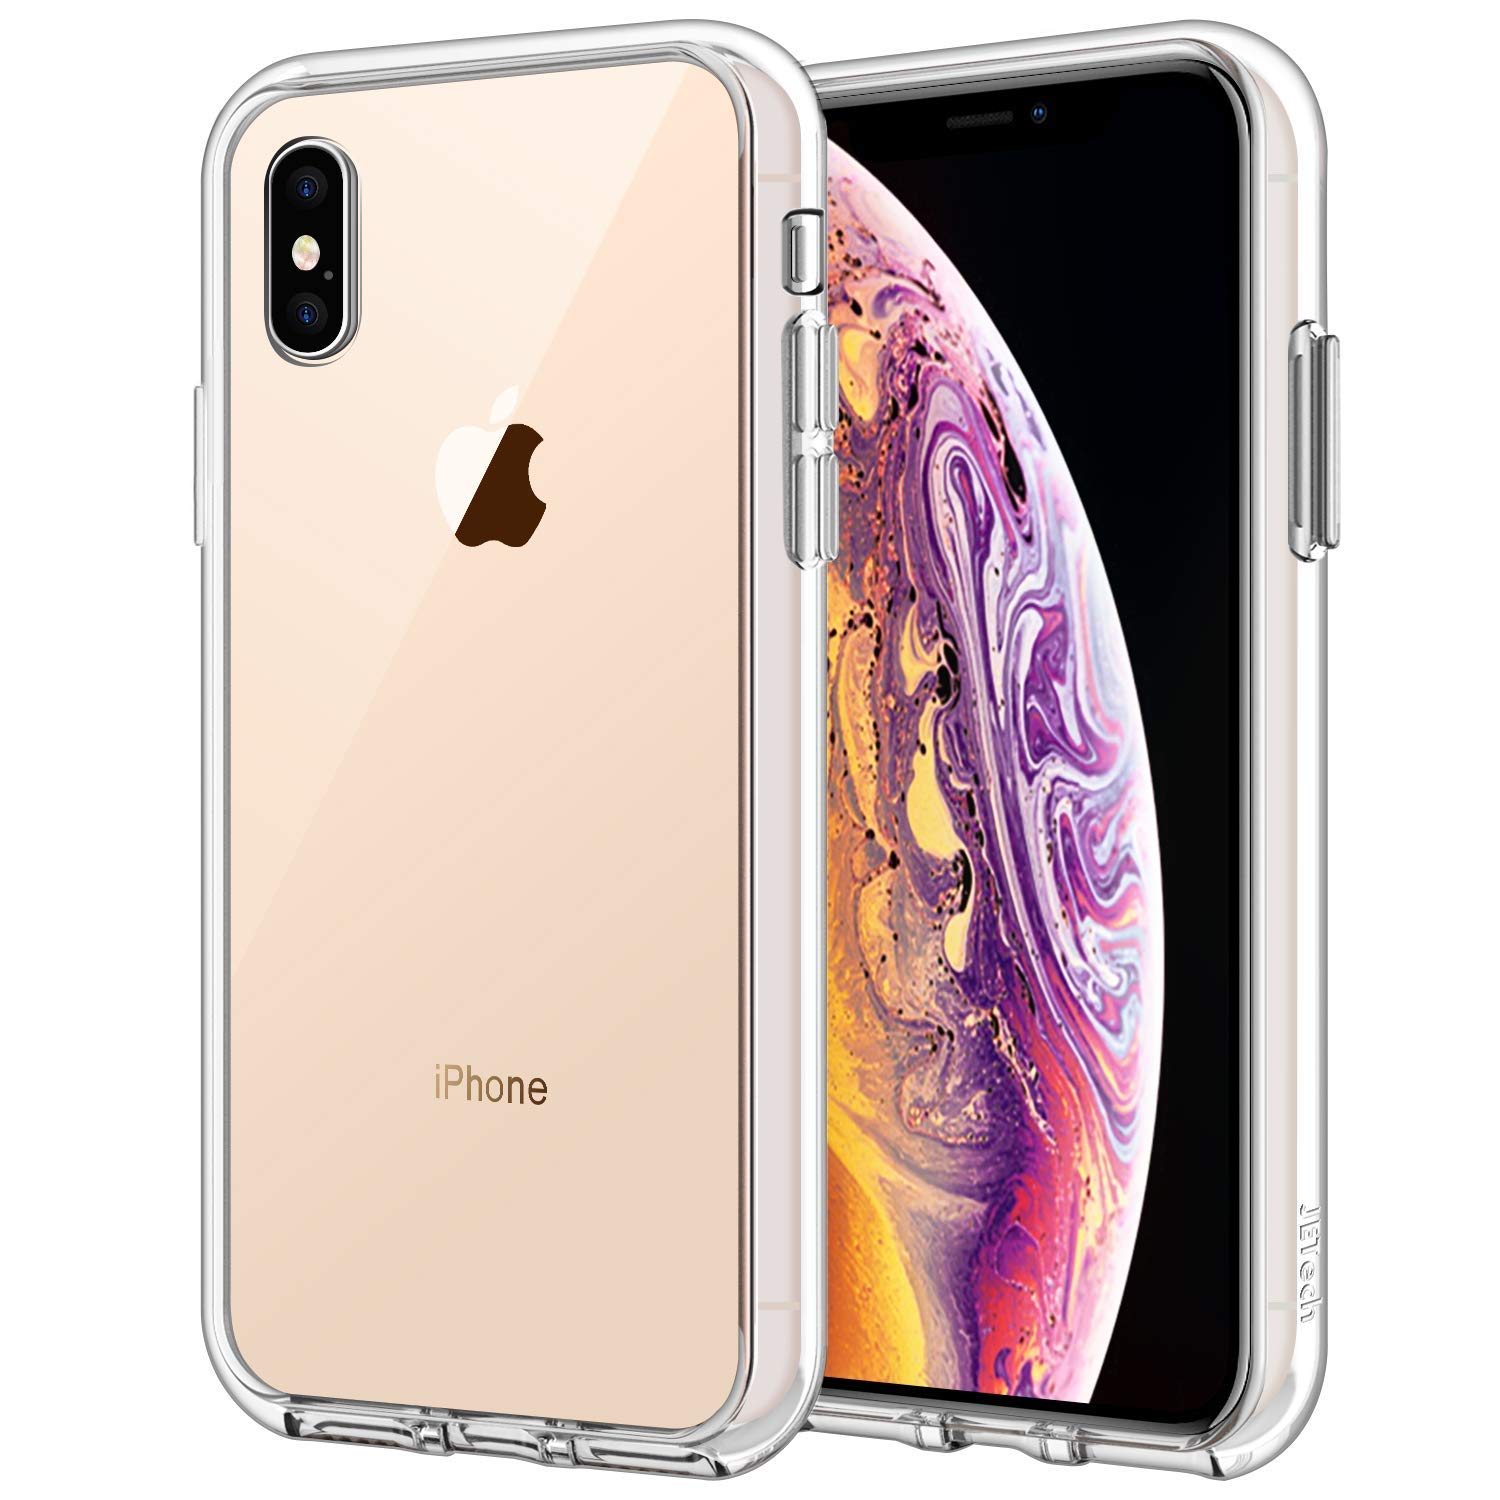 Transparent Hardback Shell Soft TPU Bumper Premium Protective Case for iPhone XS Max Acrylic iPhone XS Max Case Crystal Clear HD Shock-Absorption Protective Cover iSOUL Clear Case for iPhone XS Max